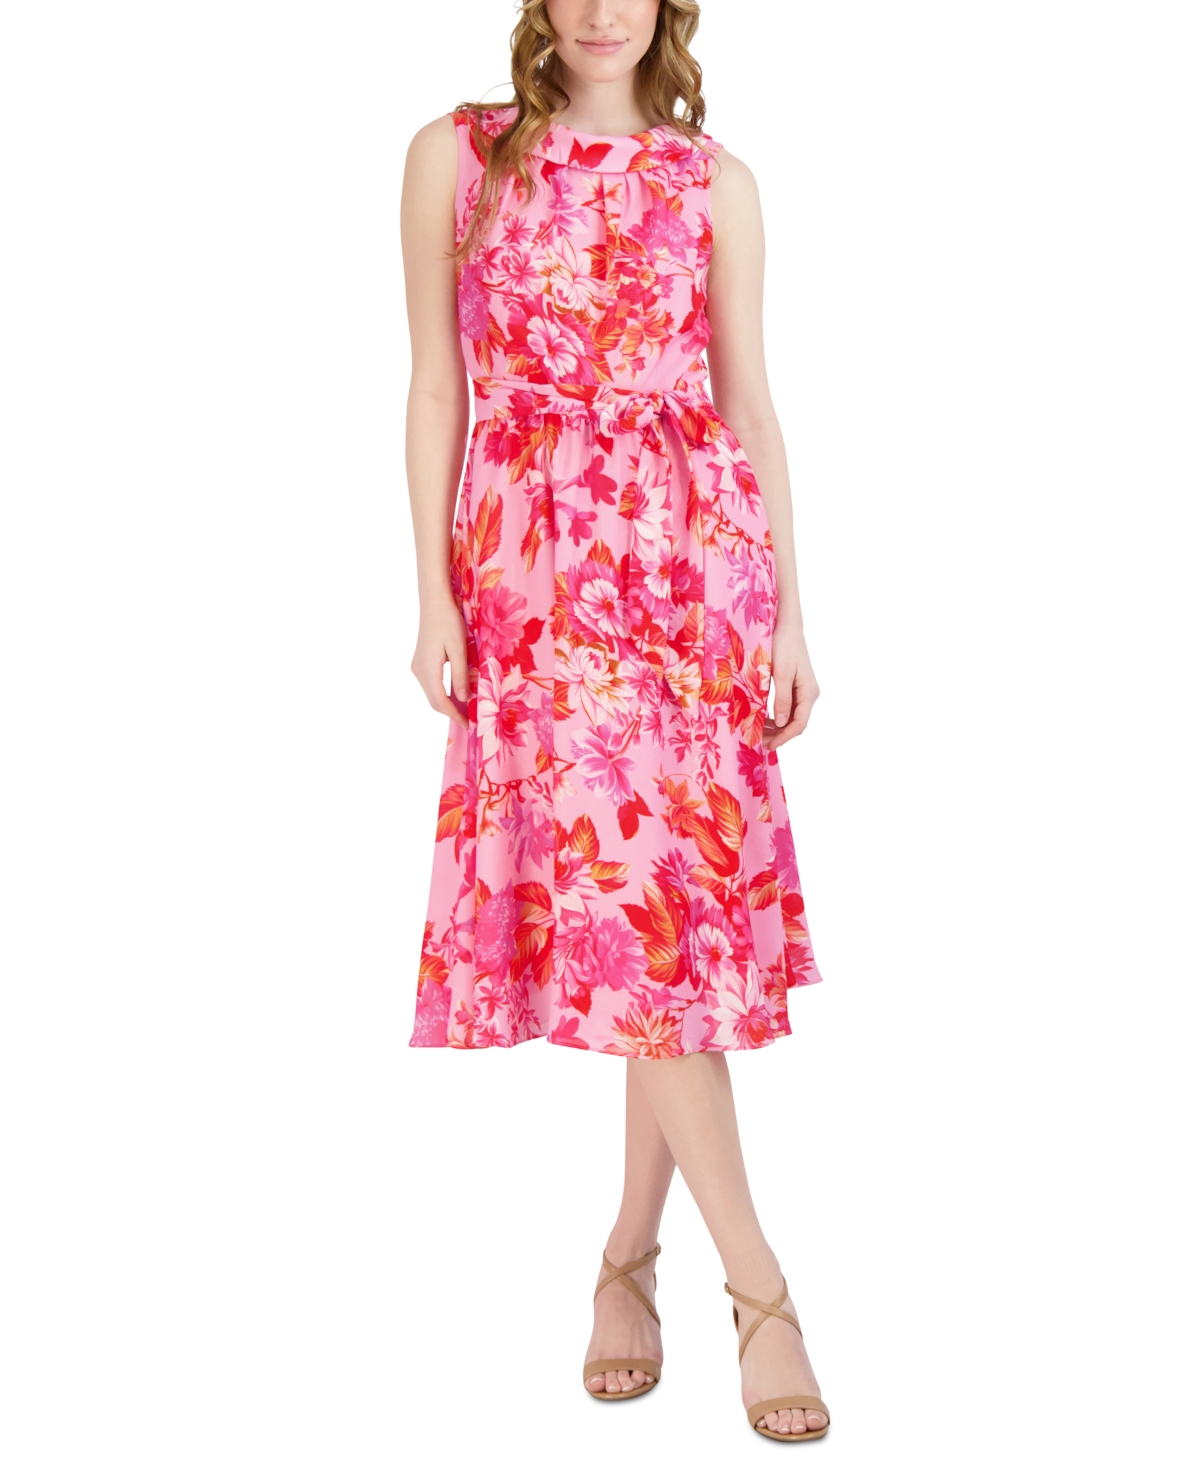 Women's Floral-Print Fit & Flare Dress - Pink Multi